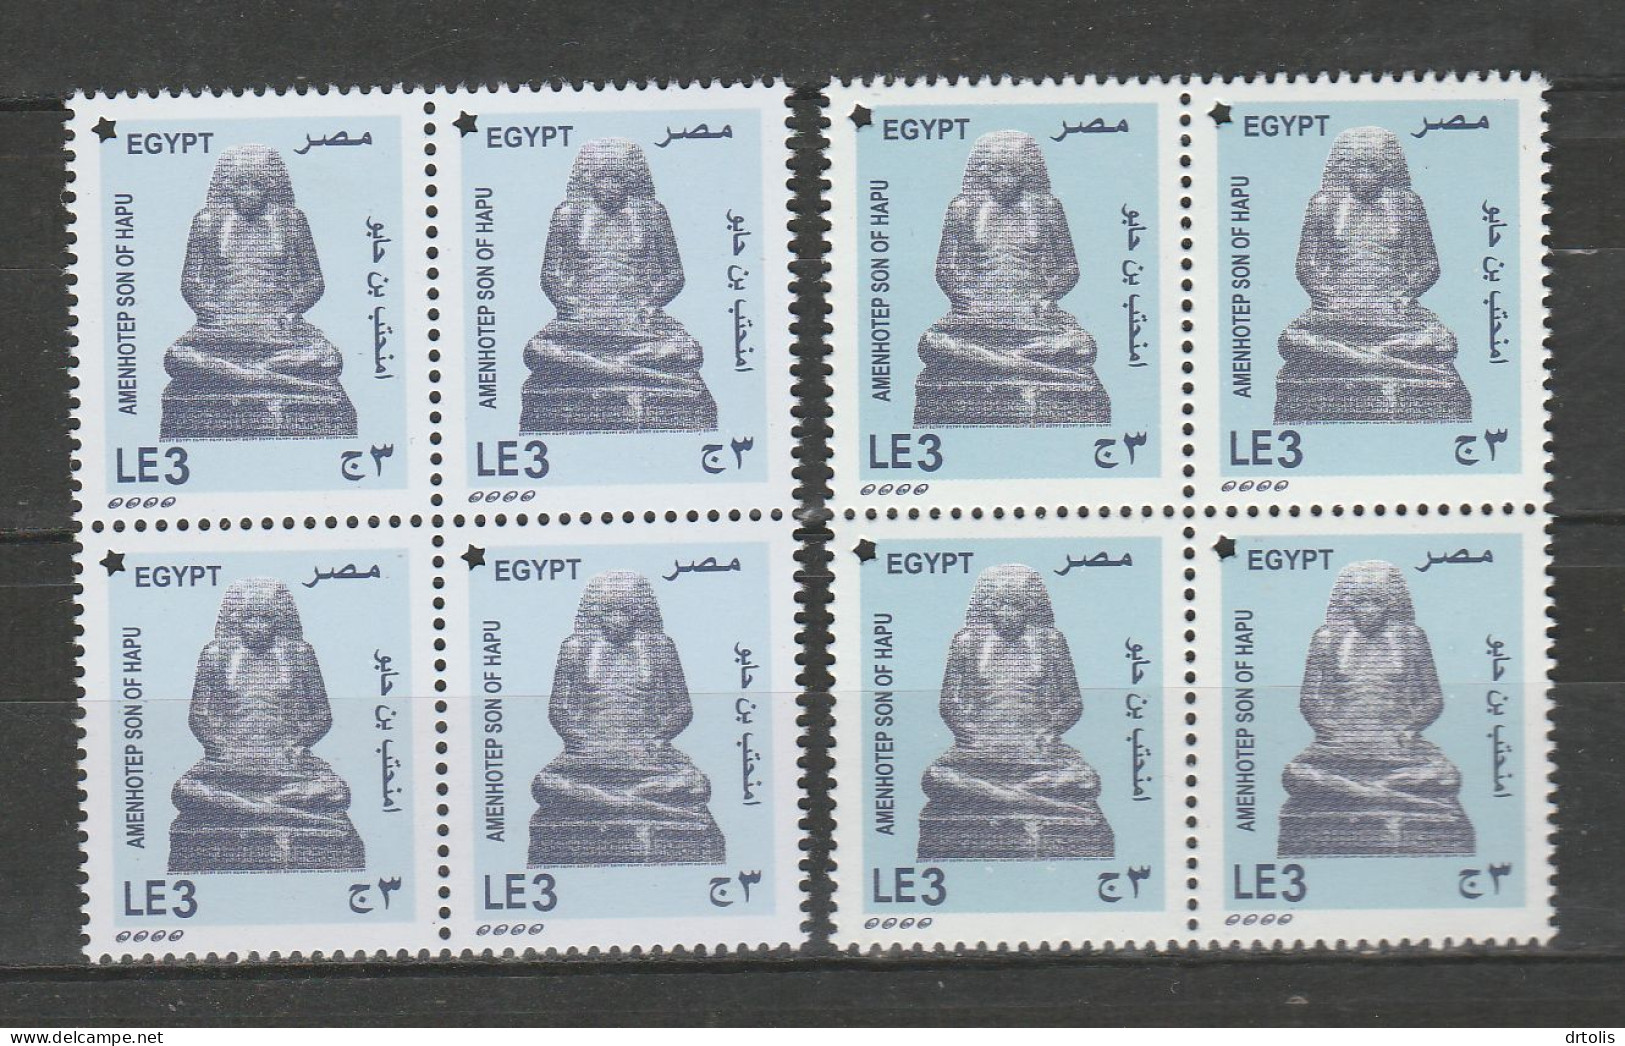 EGYPT / 2020 ( NO WMK ) & 2023 WITH WMK ) / 2 DIFFERENT EDITIONS / AMENHOTEP ; SON OF HAPU / MNH / VF - Ongebruikt